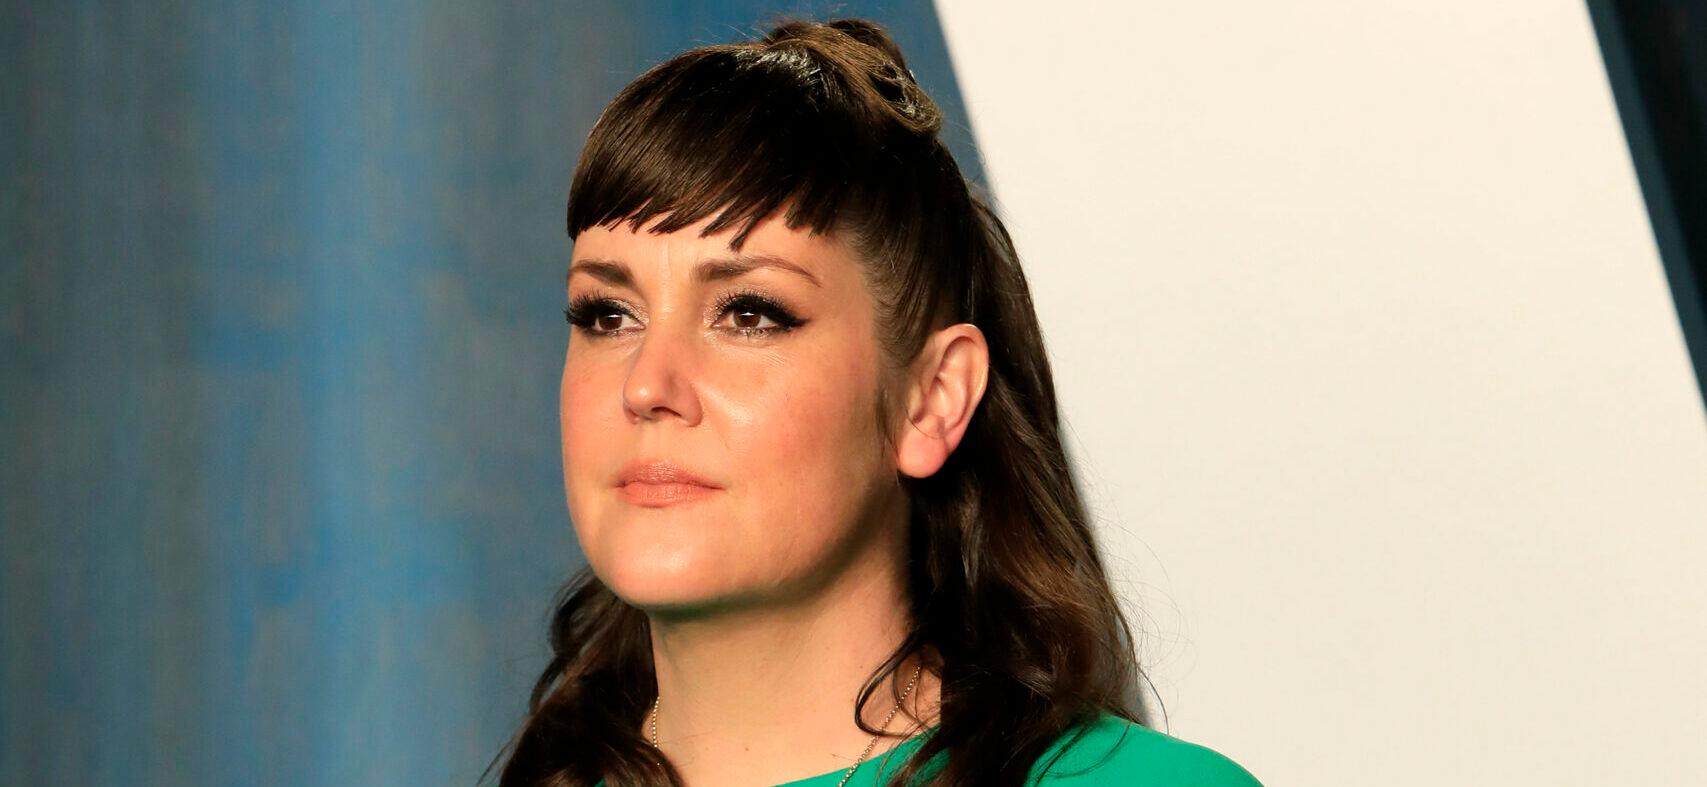 ‘Yellowjackets’ Star Melanie Lynskey Opens Up About Aging In Hollywood